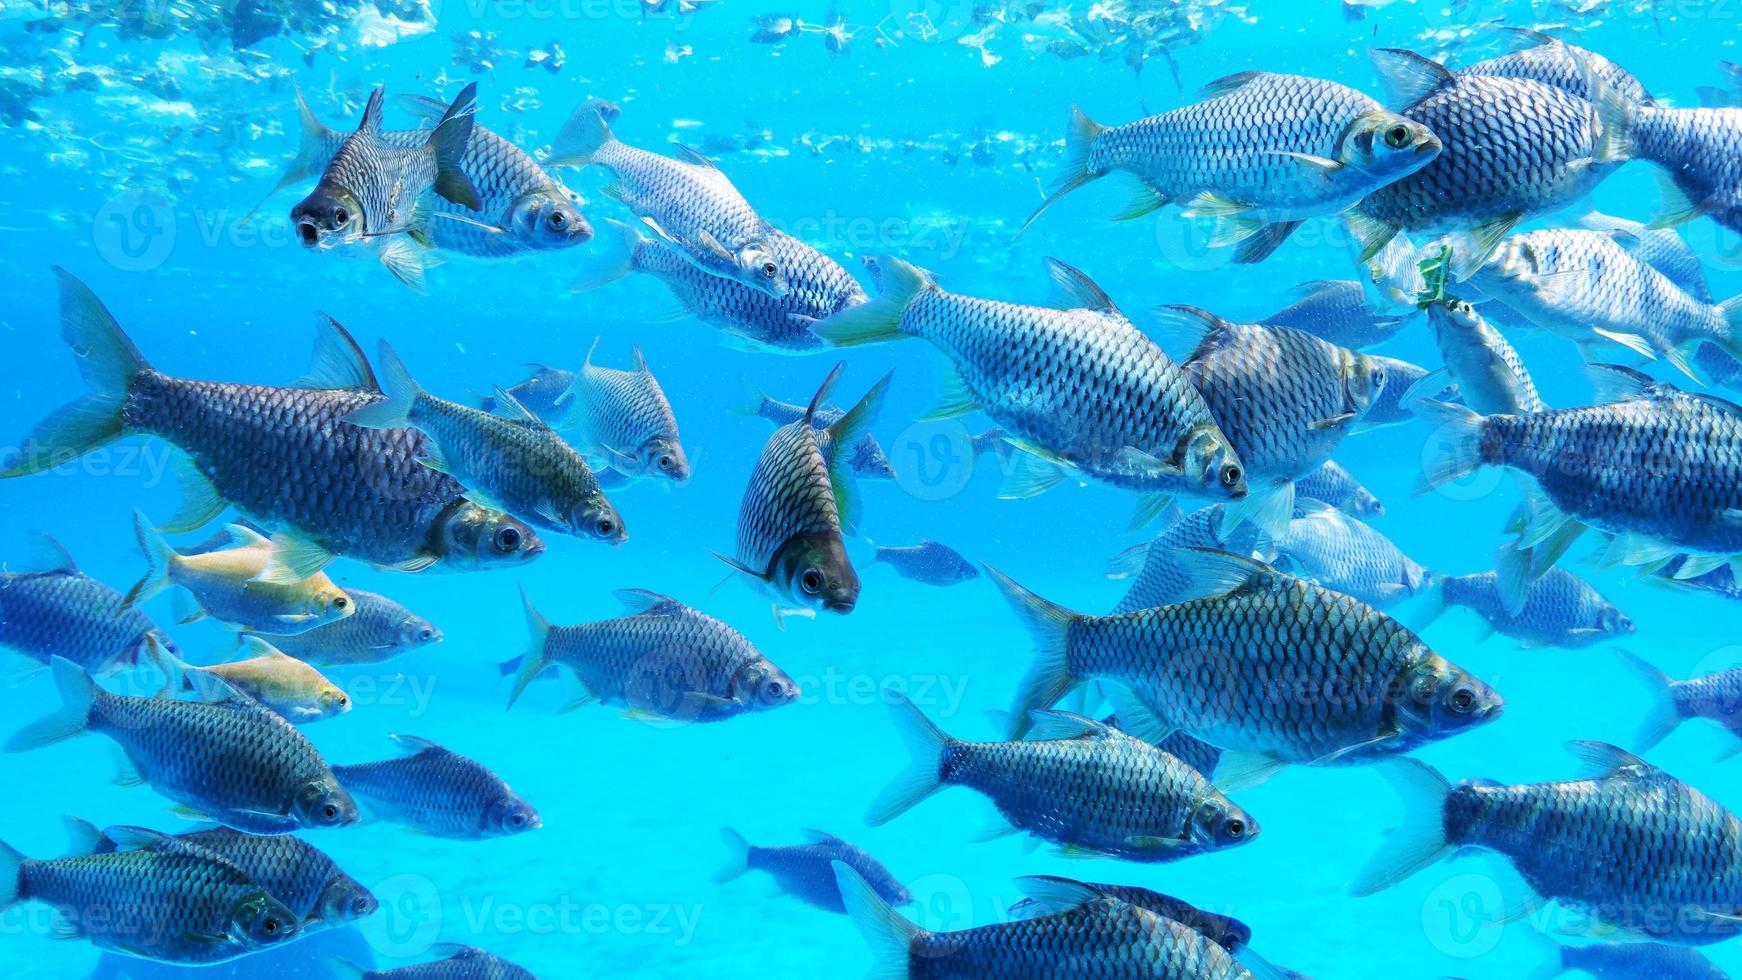 Group of silver barb fish in water. photo